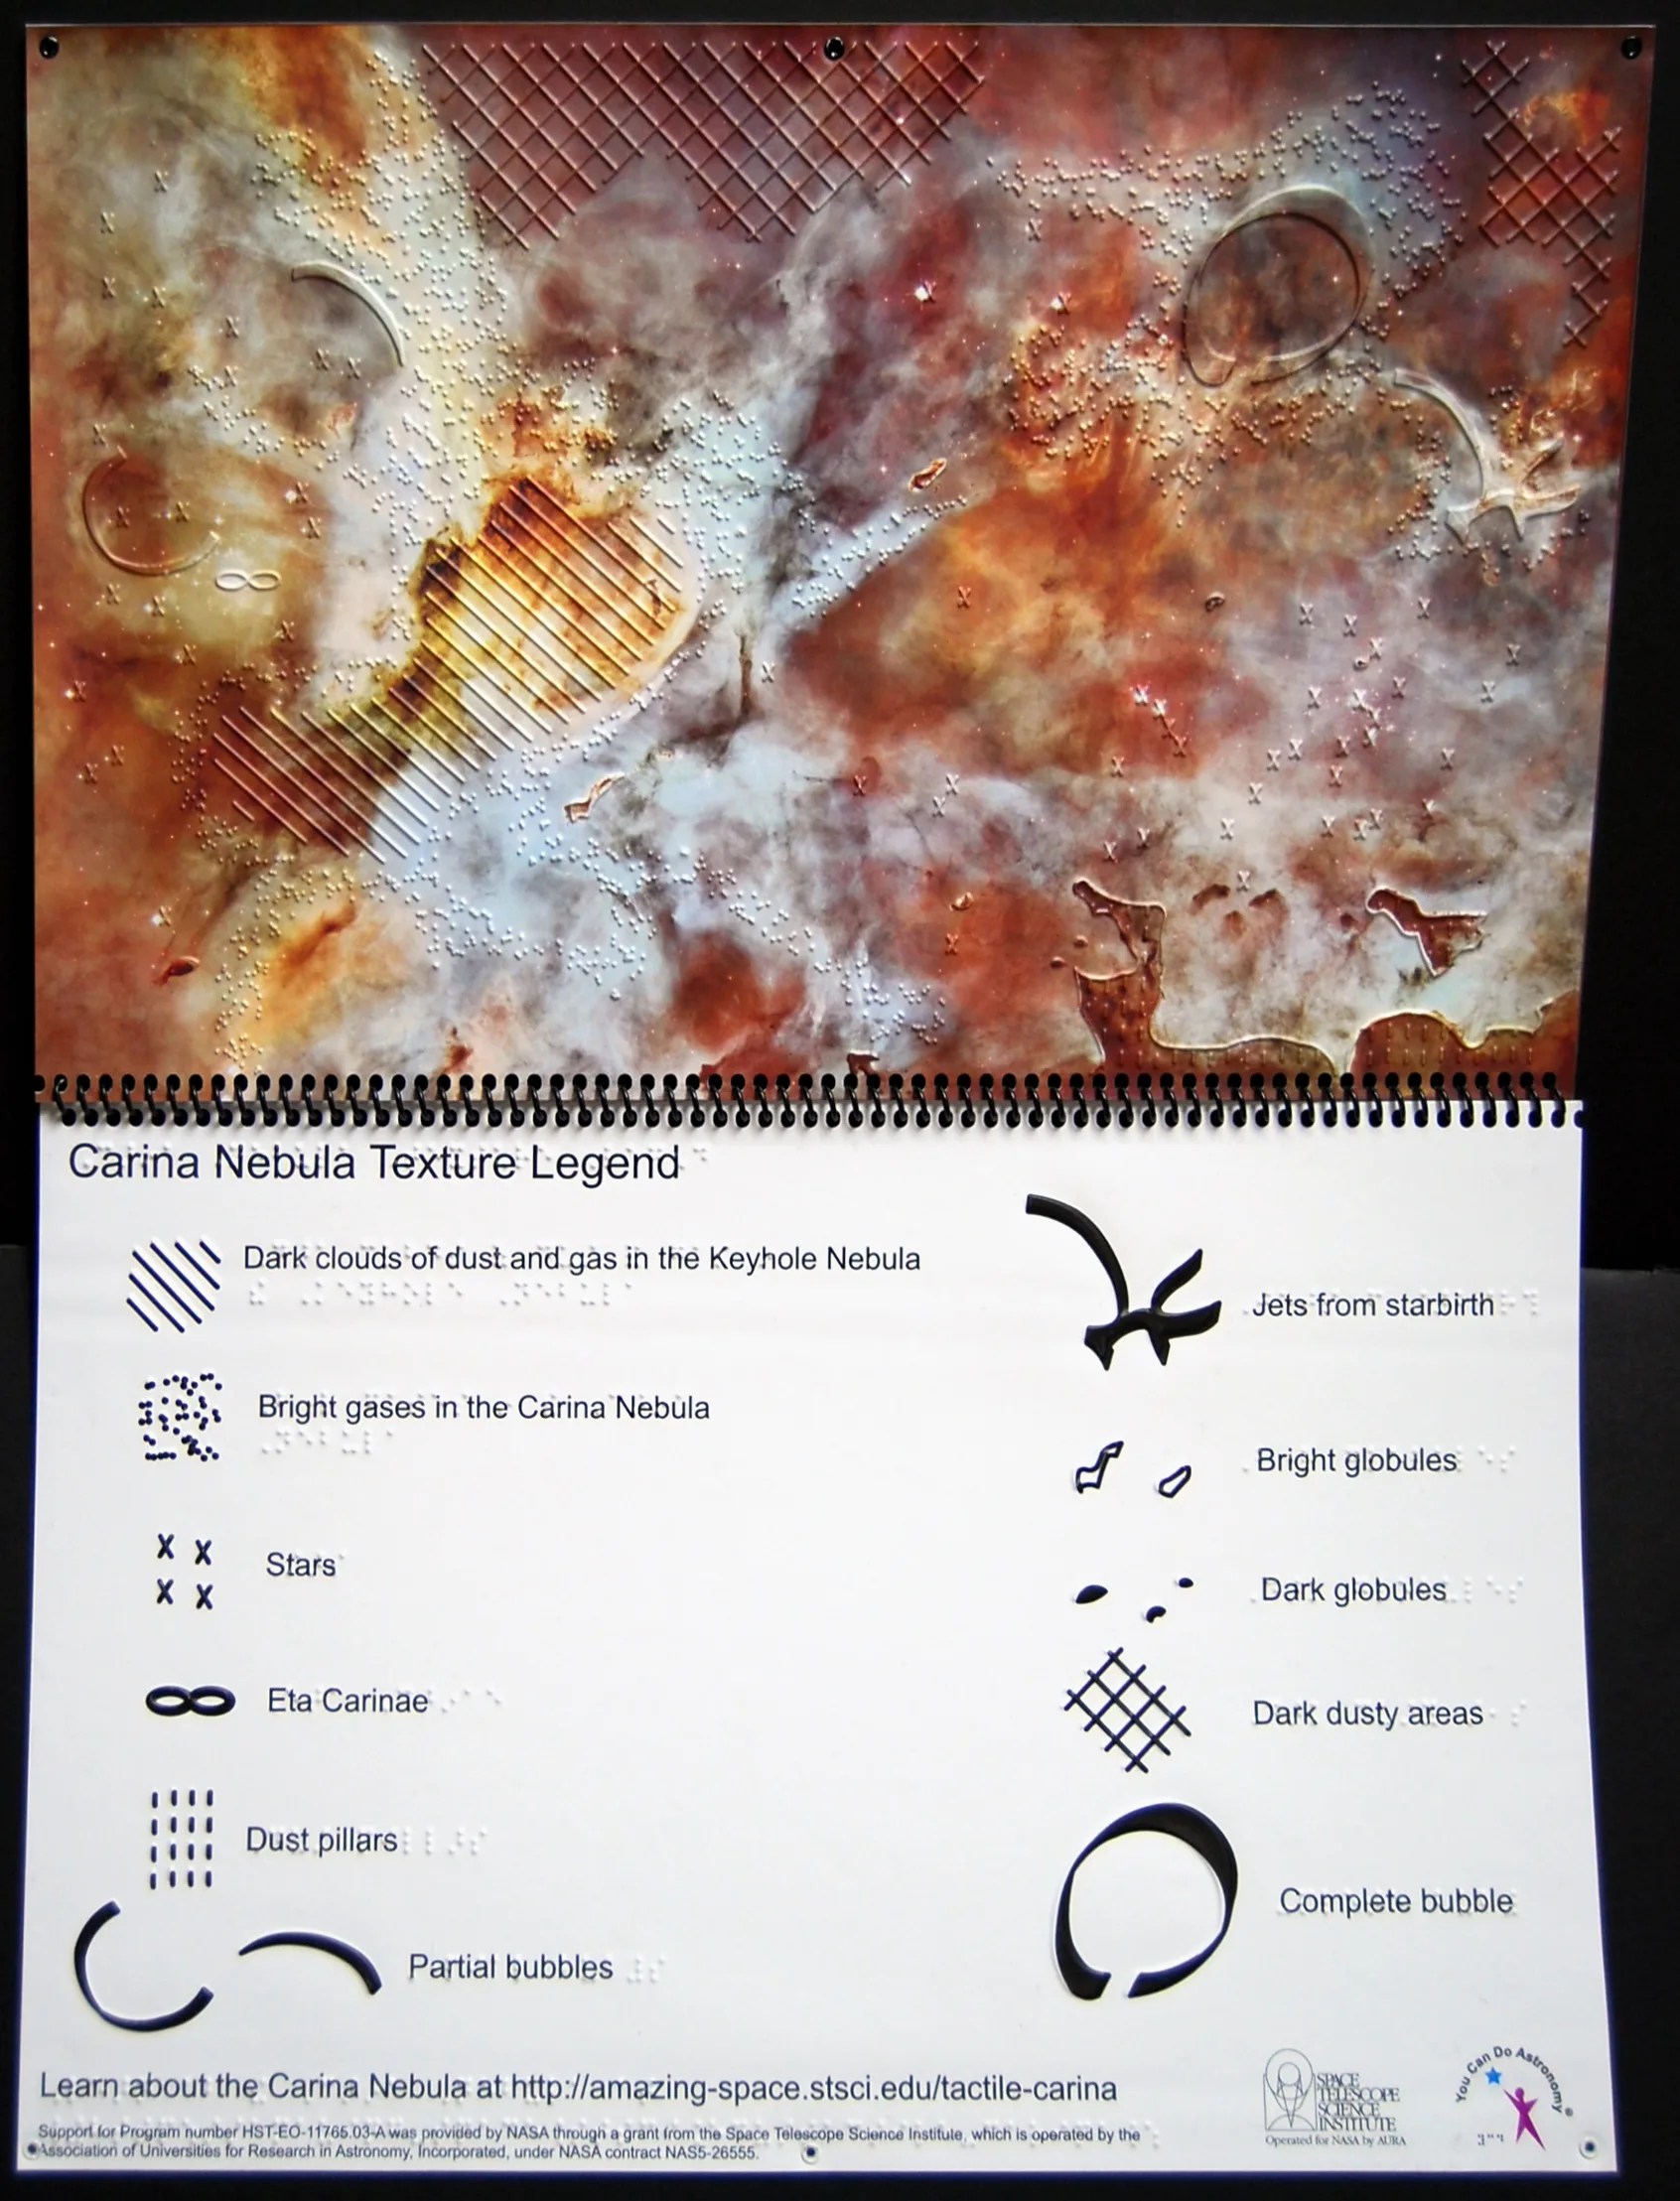 image of embossed Carina Nebula from the book